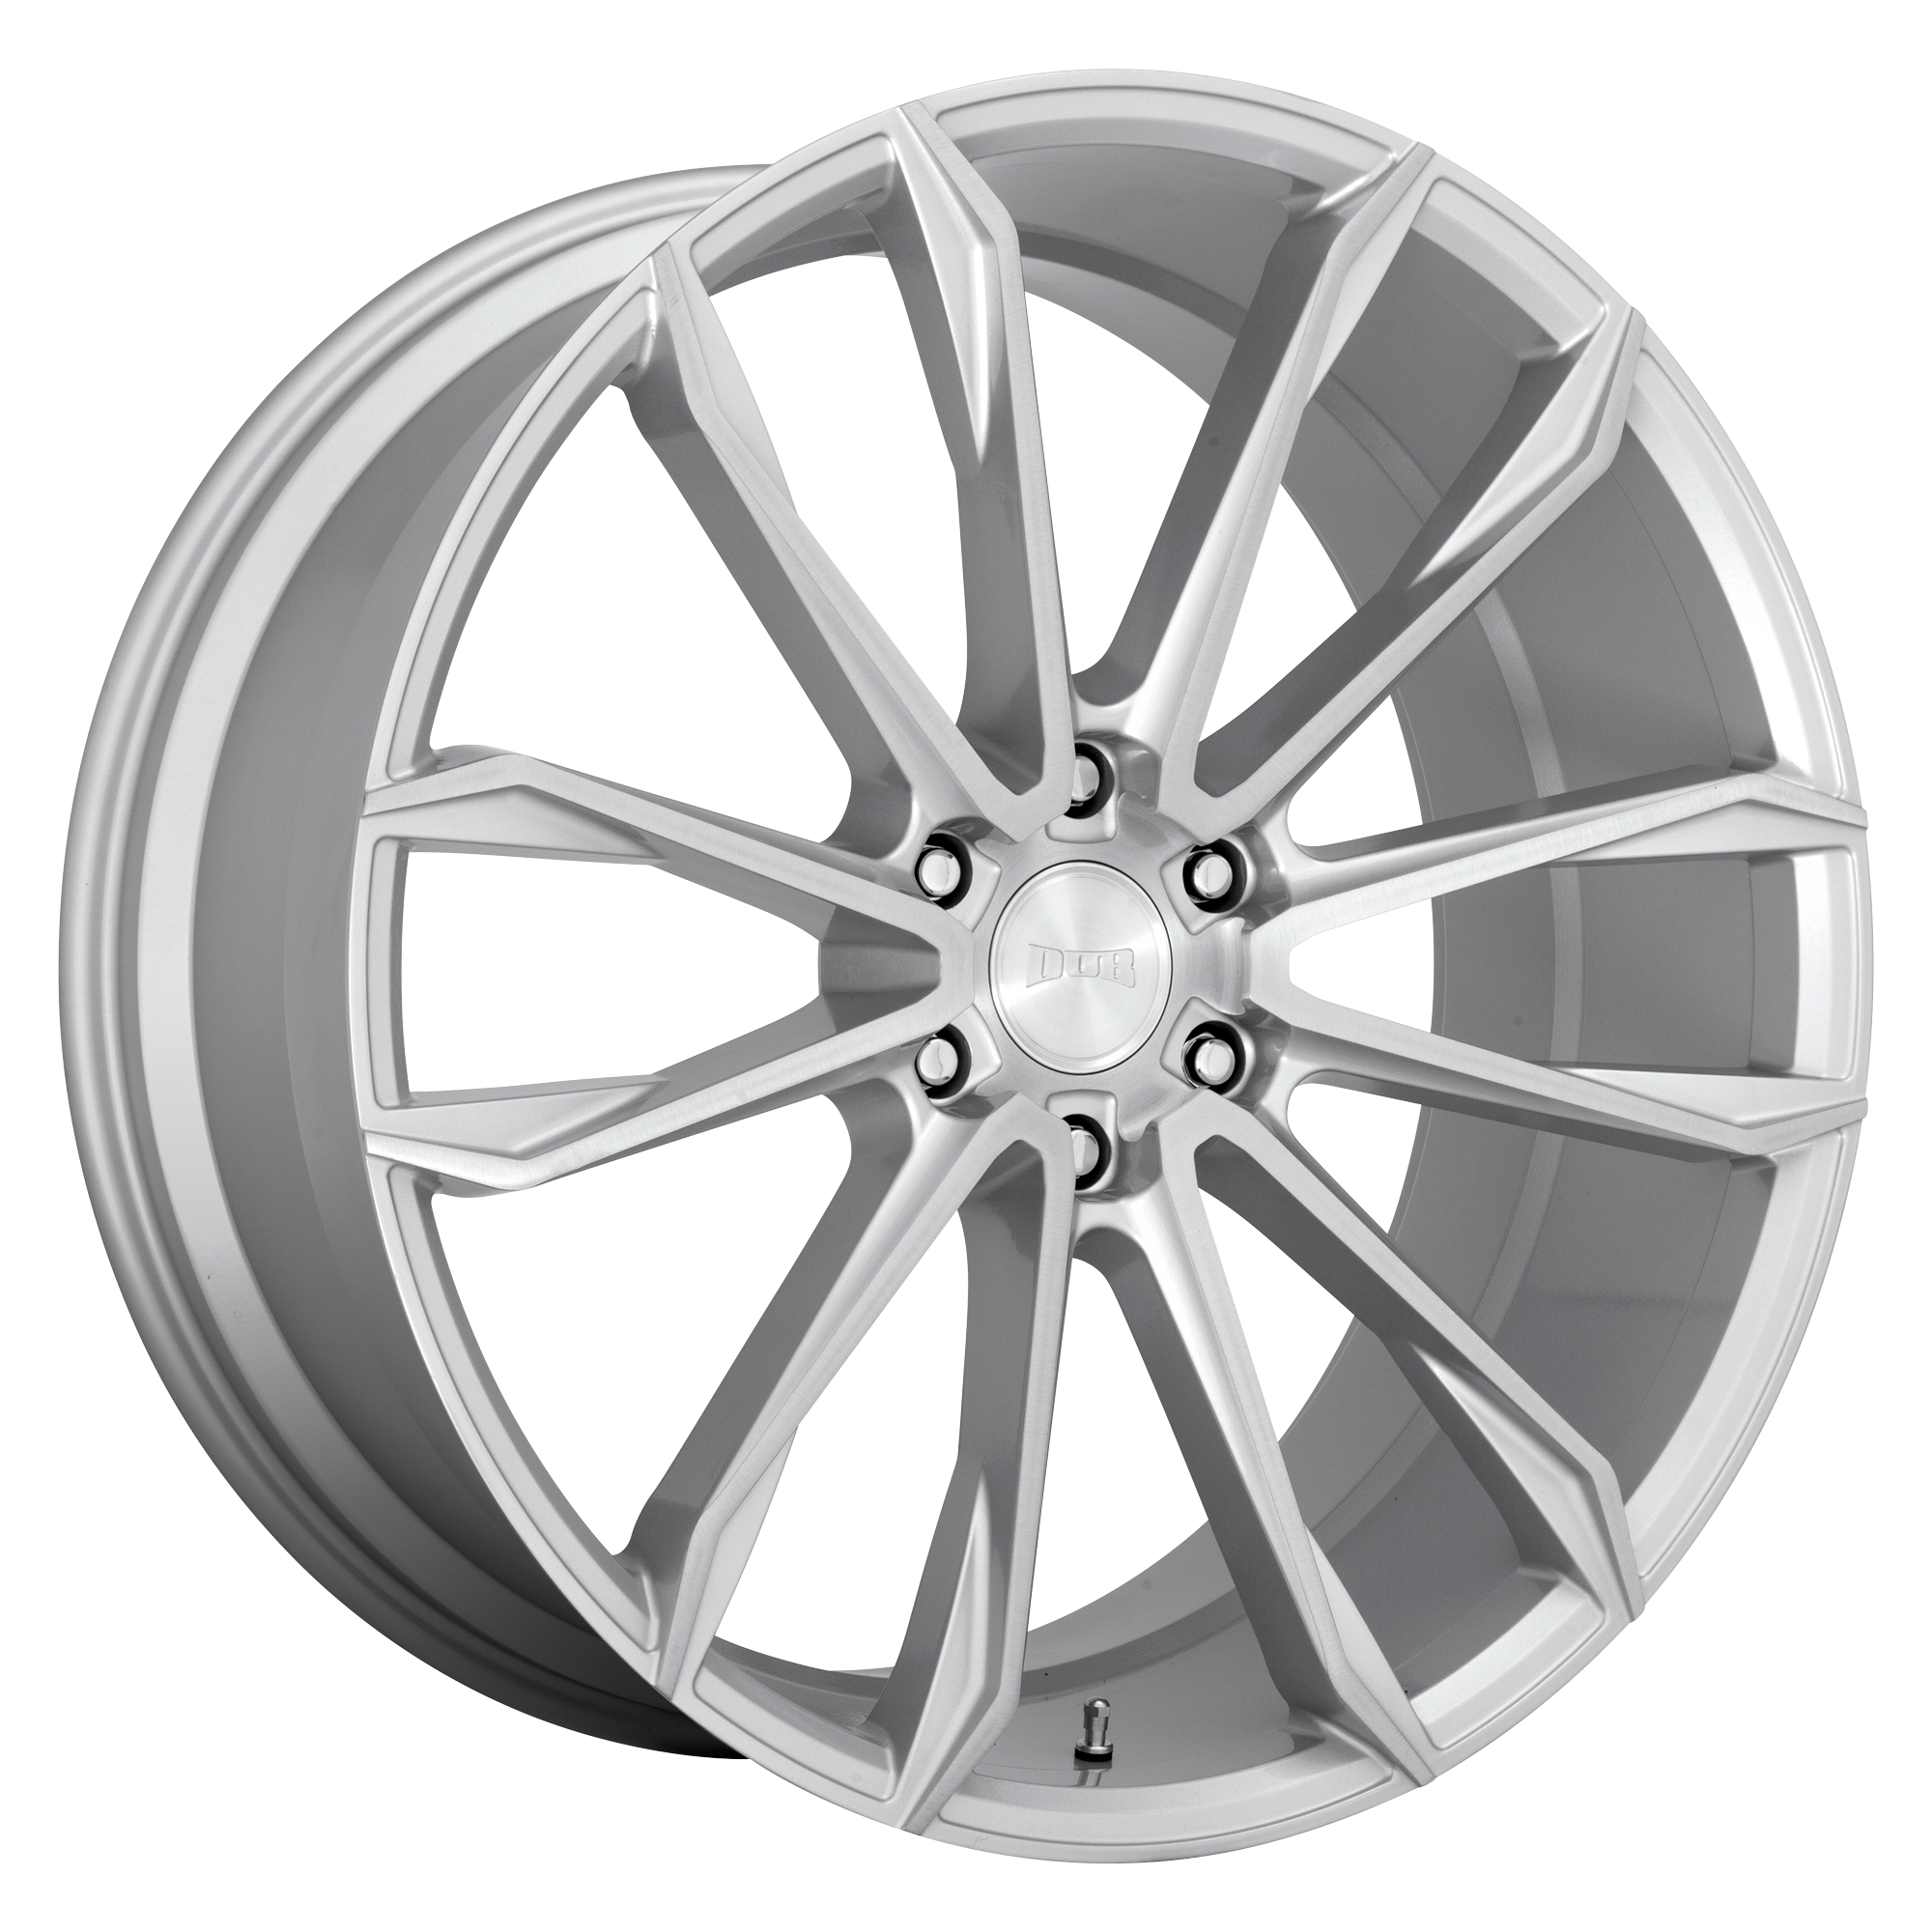 CLOUT 24x10 6x135.00 GLOSS SILVER BRUSHED (30 mm) - Tires and Engine Performance